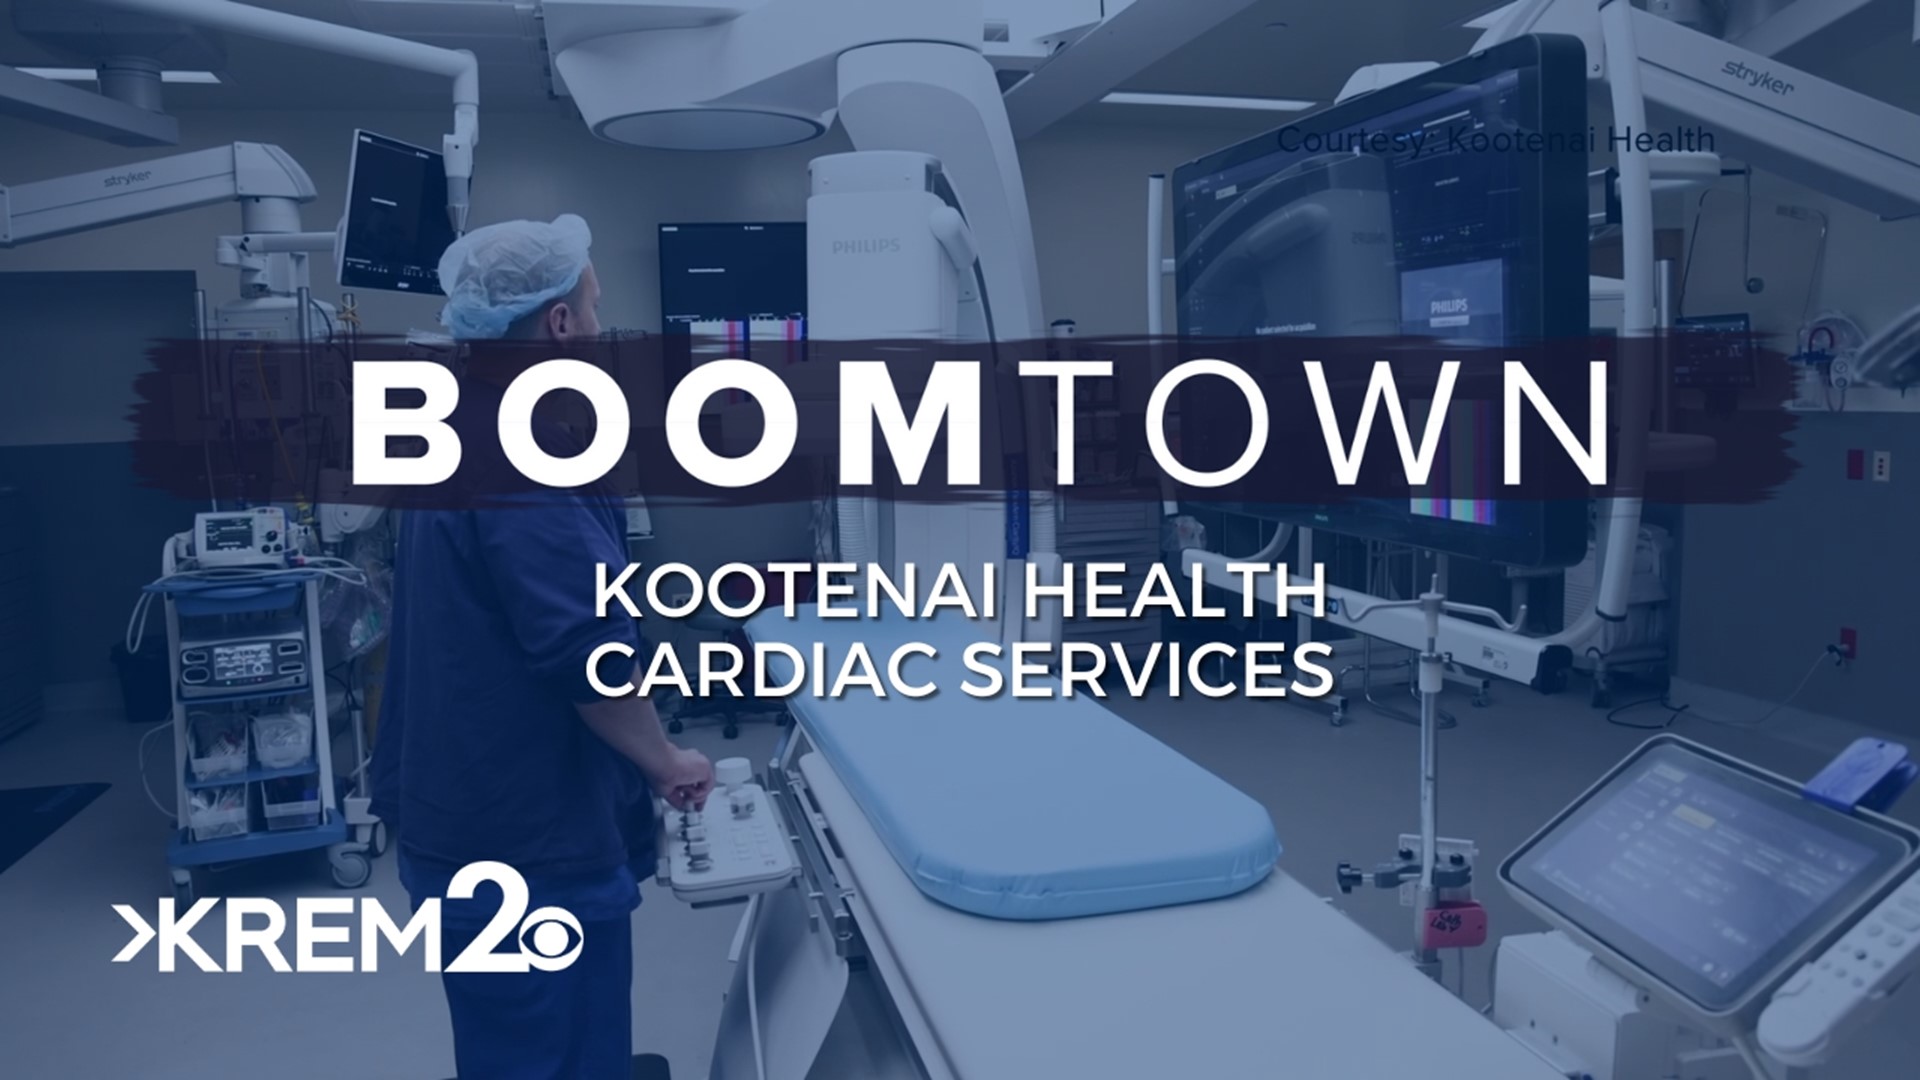 Doctors say the heart centers expansion is part of a phased approach to continuing growth in the hospital.